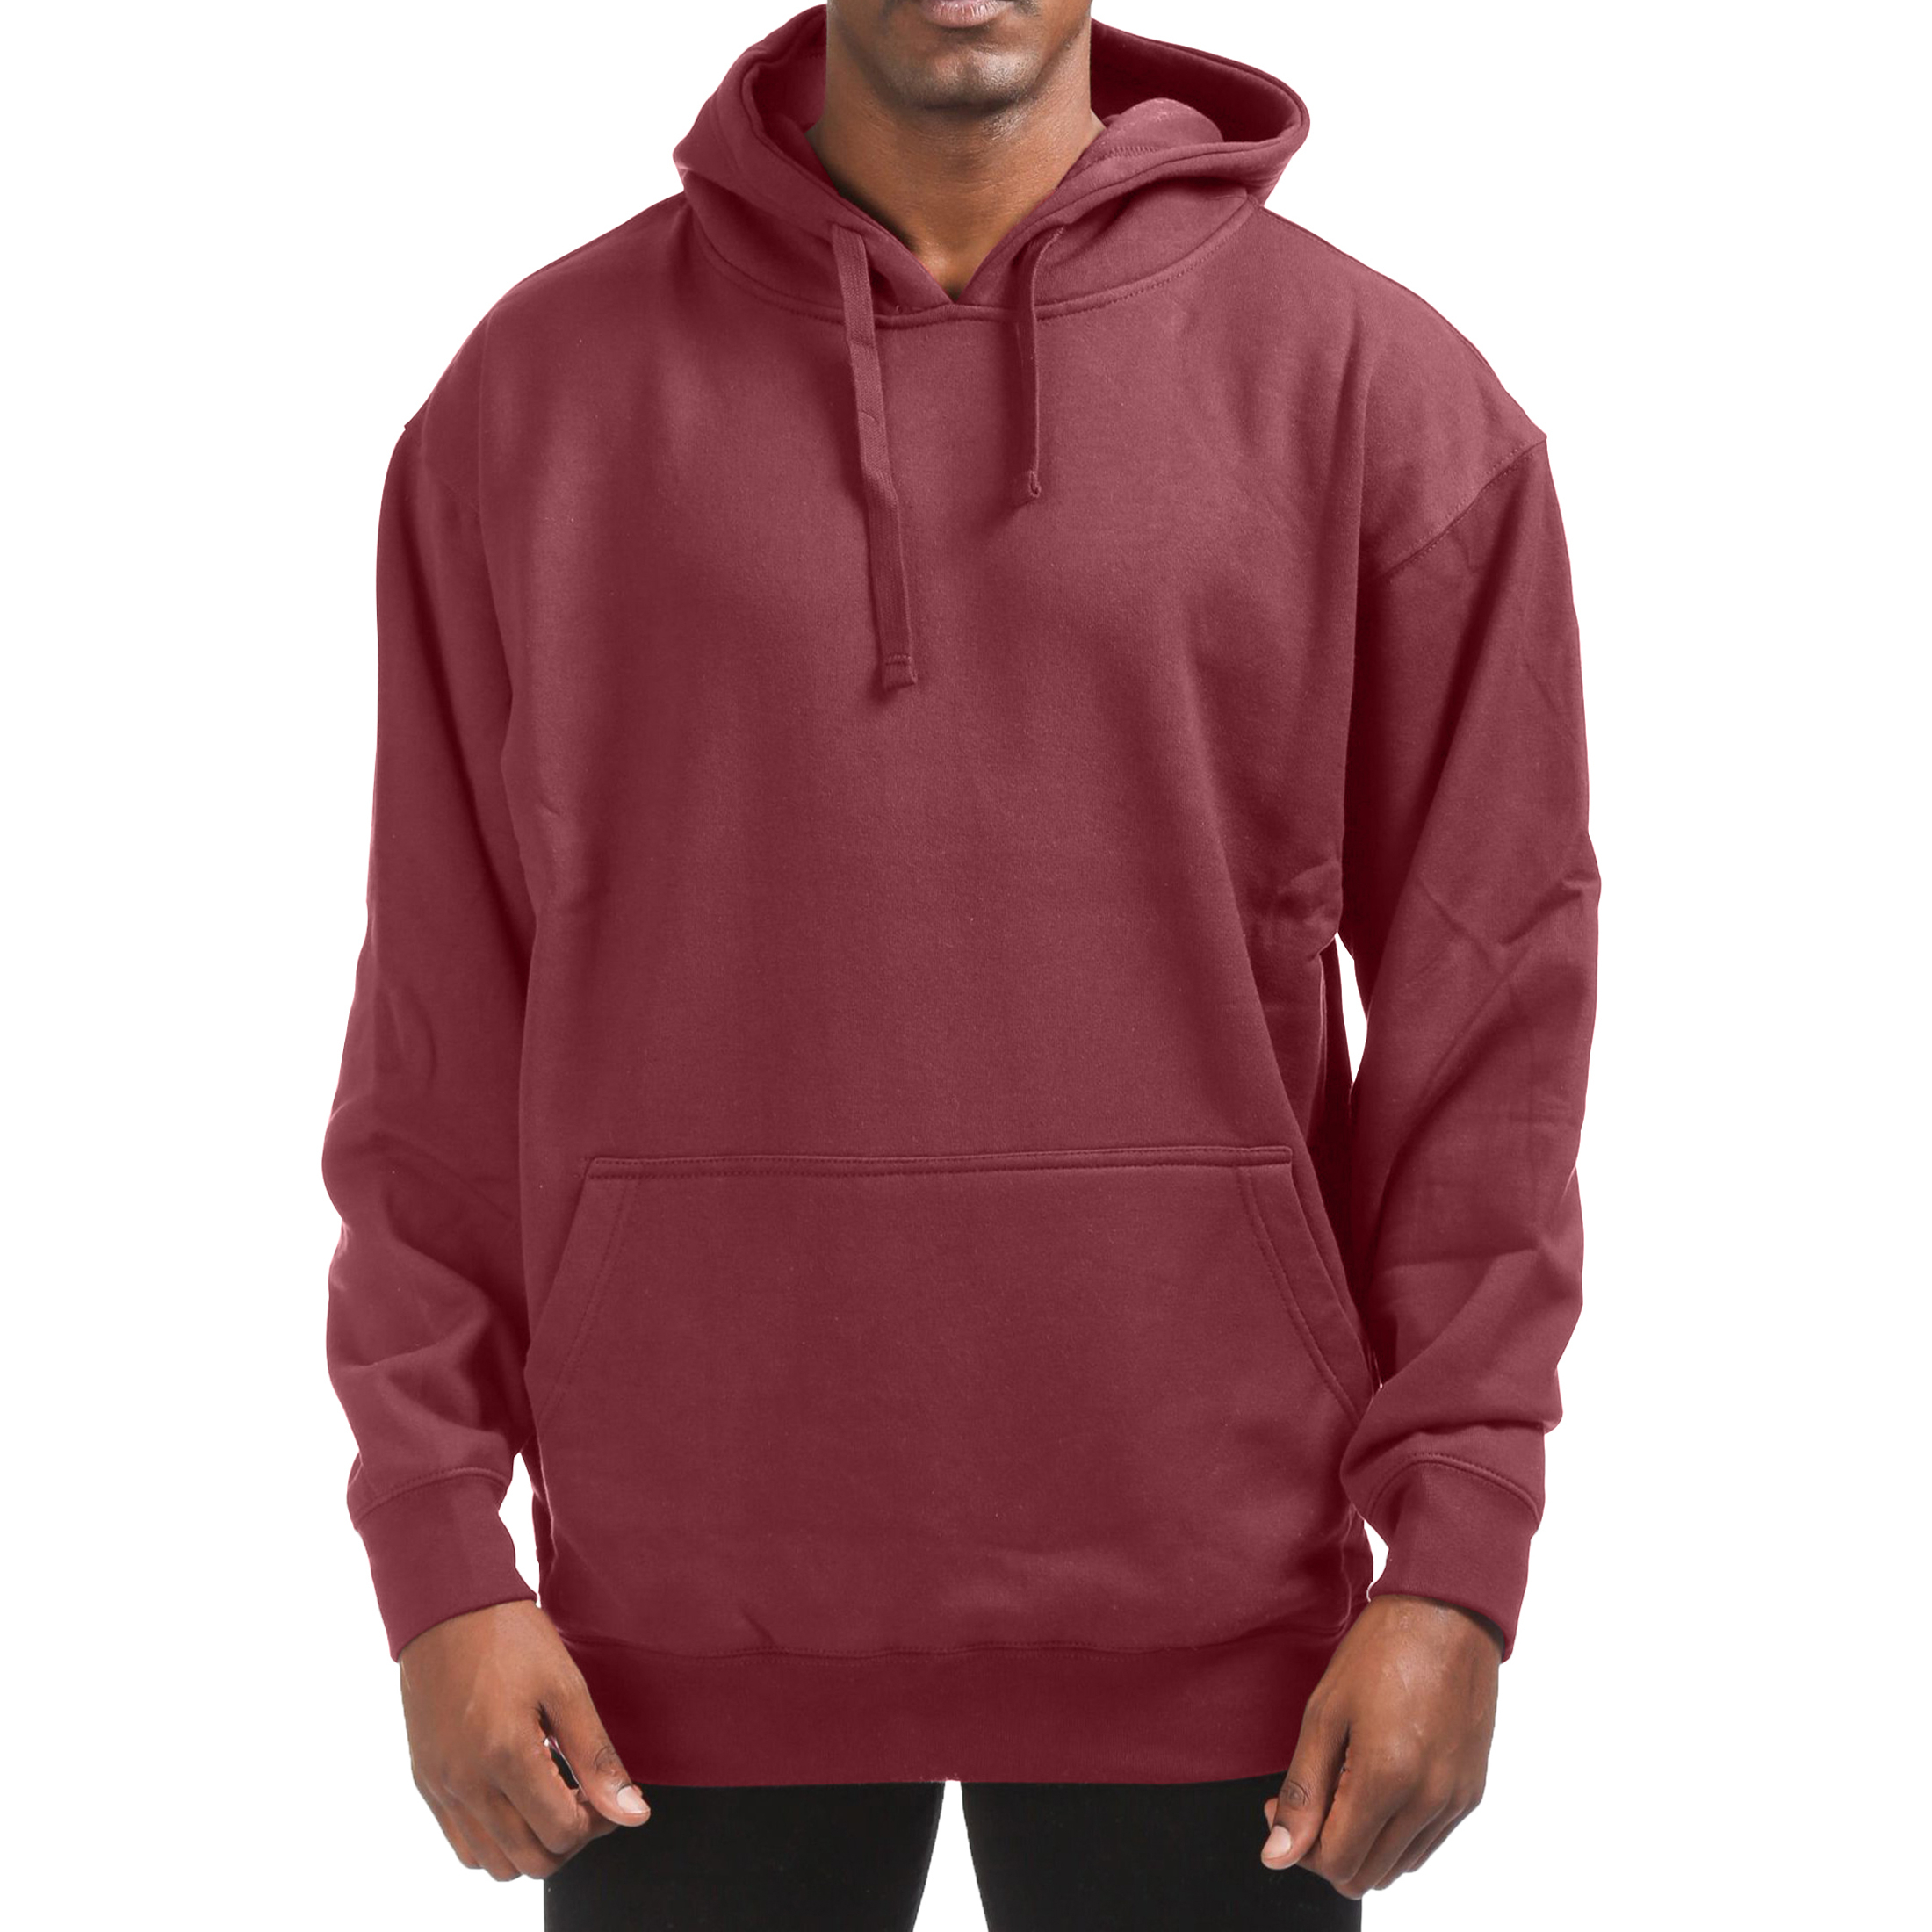 Men's Cotton-Blend Fleece Pullover Hoodie With Pocket (Big & Tall Sizes Available) - Burgundy, X-Large